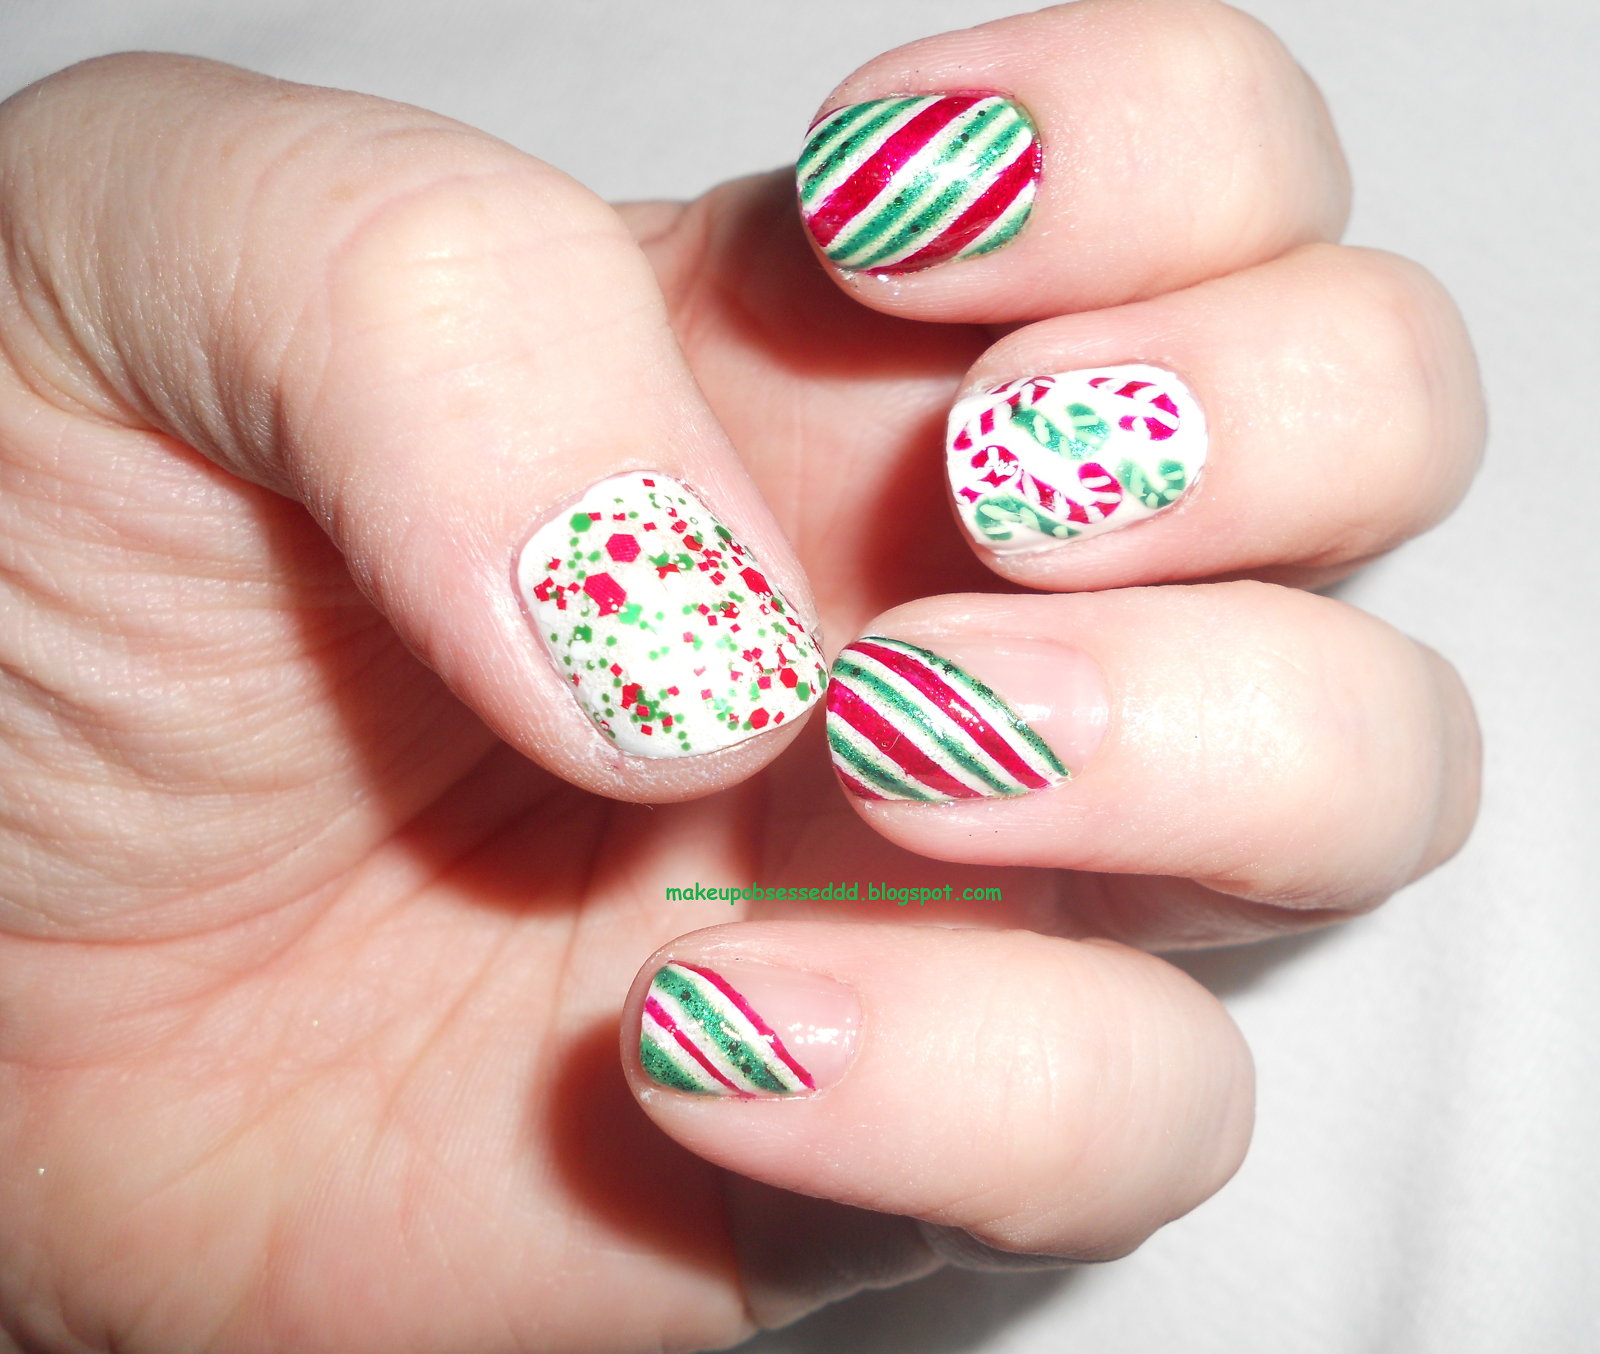 Makeup & Polish Obsessed Girl: 12 Days of Christmas: Day 3 Candy Cane